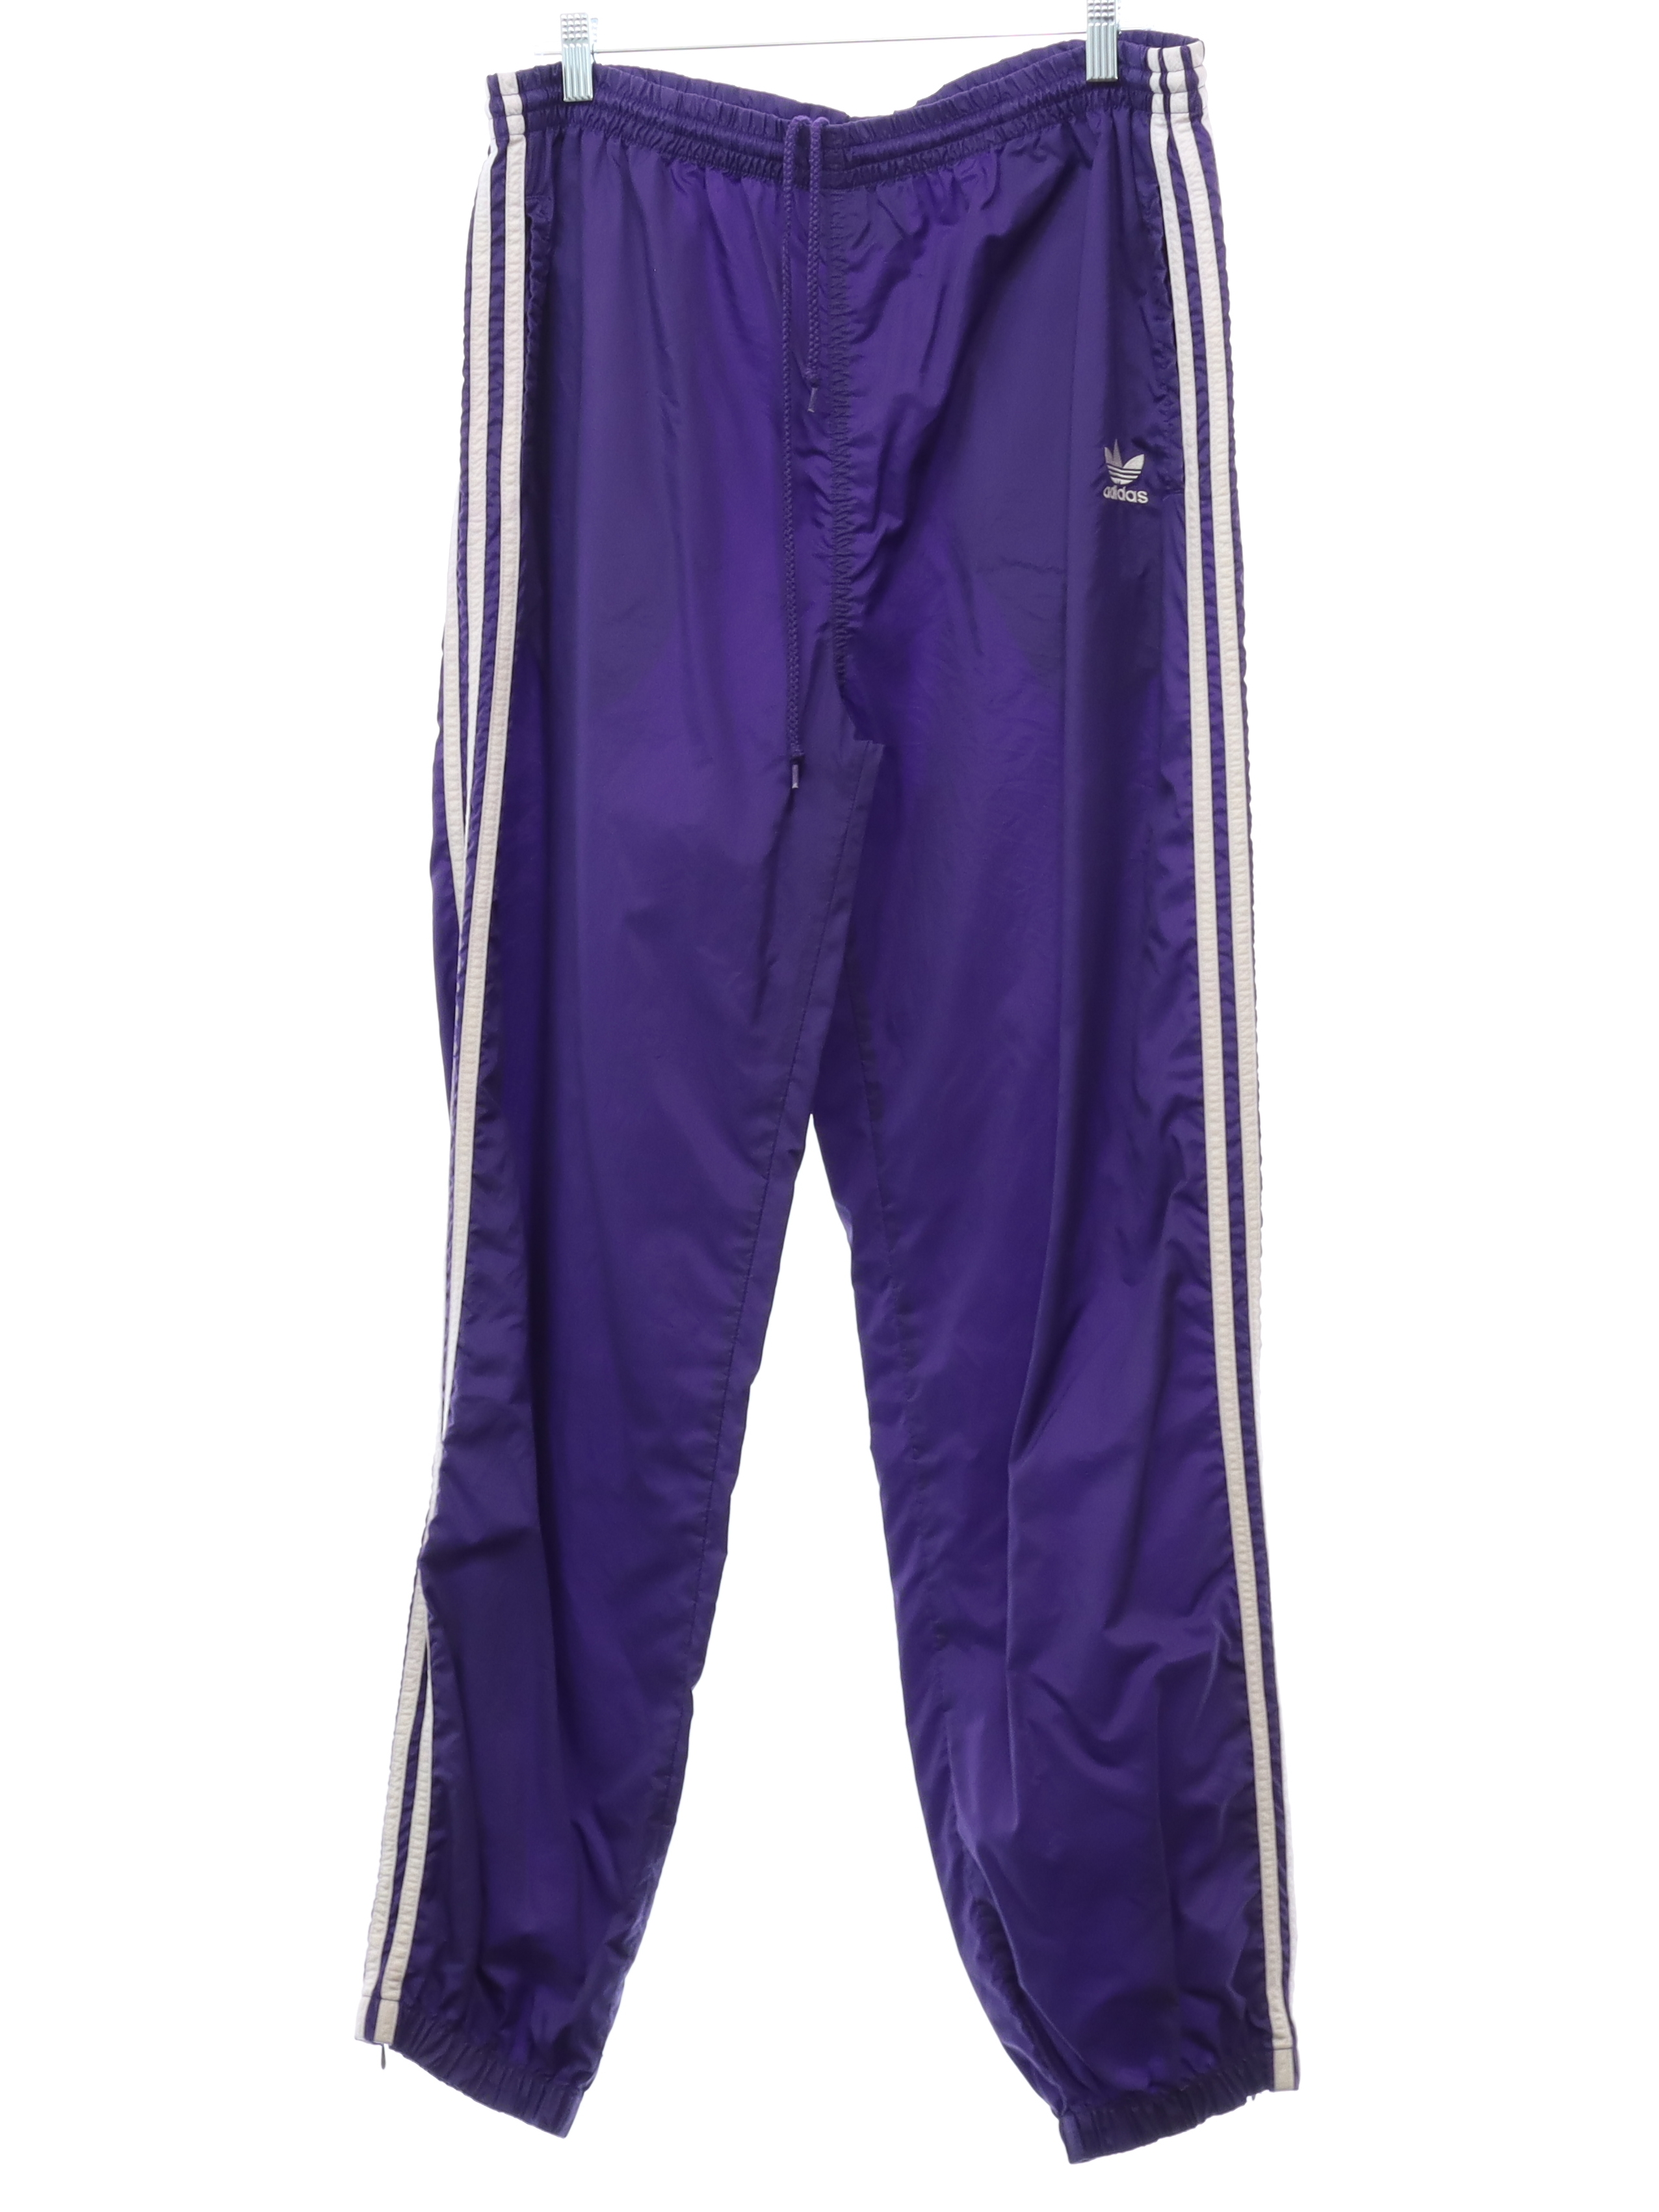 90's Vintage Pants: Late 90s -Adidas- Mens purple solid colored nylon shell  flat front track or jogging pants with elastic cuff hem with ankle zipper,  vertical seam inset side entry front pockets